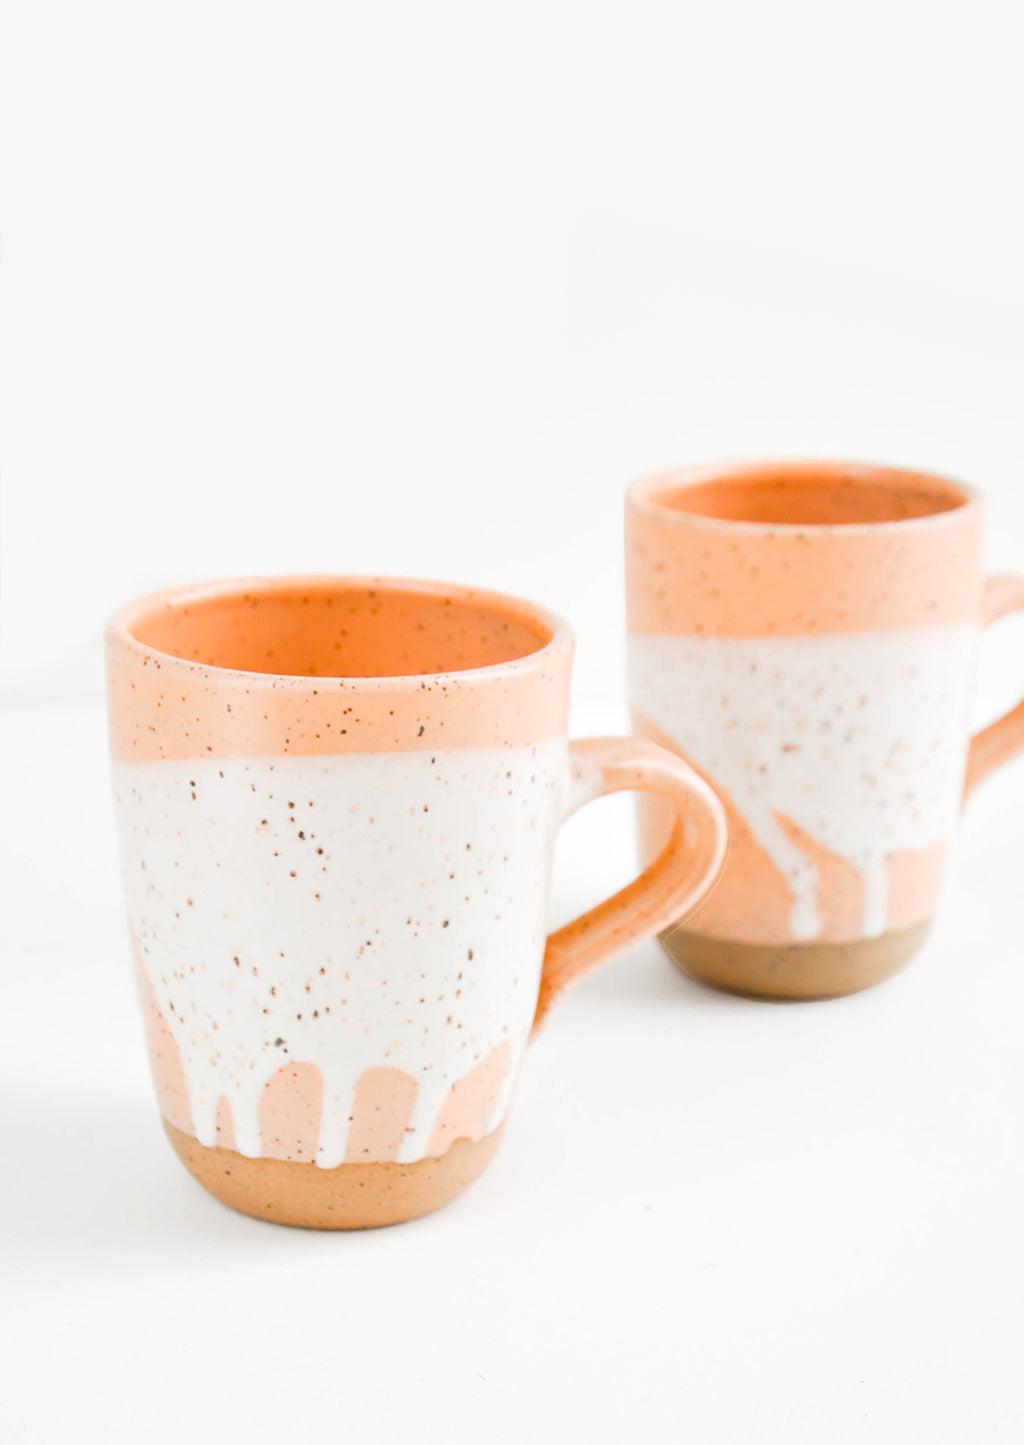 Peach / White: Two ceramic mugs in orange and white with brown speckles.